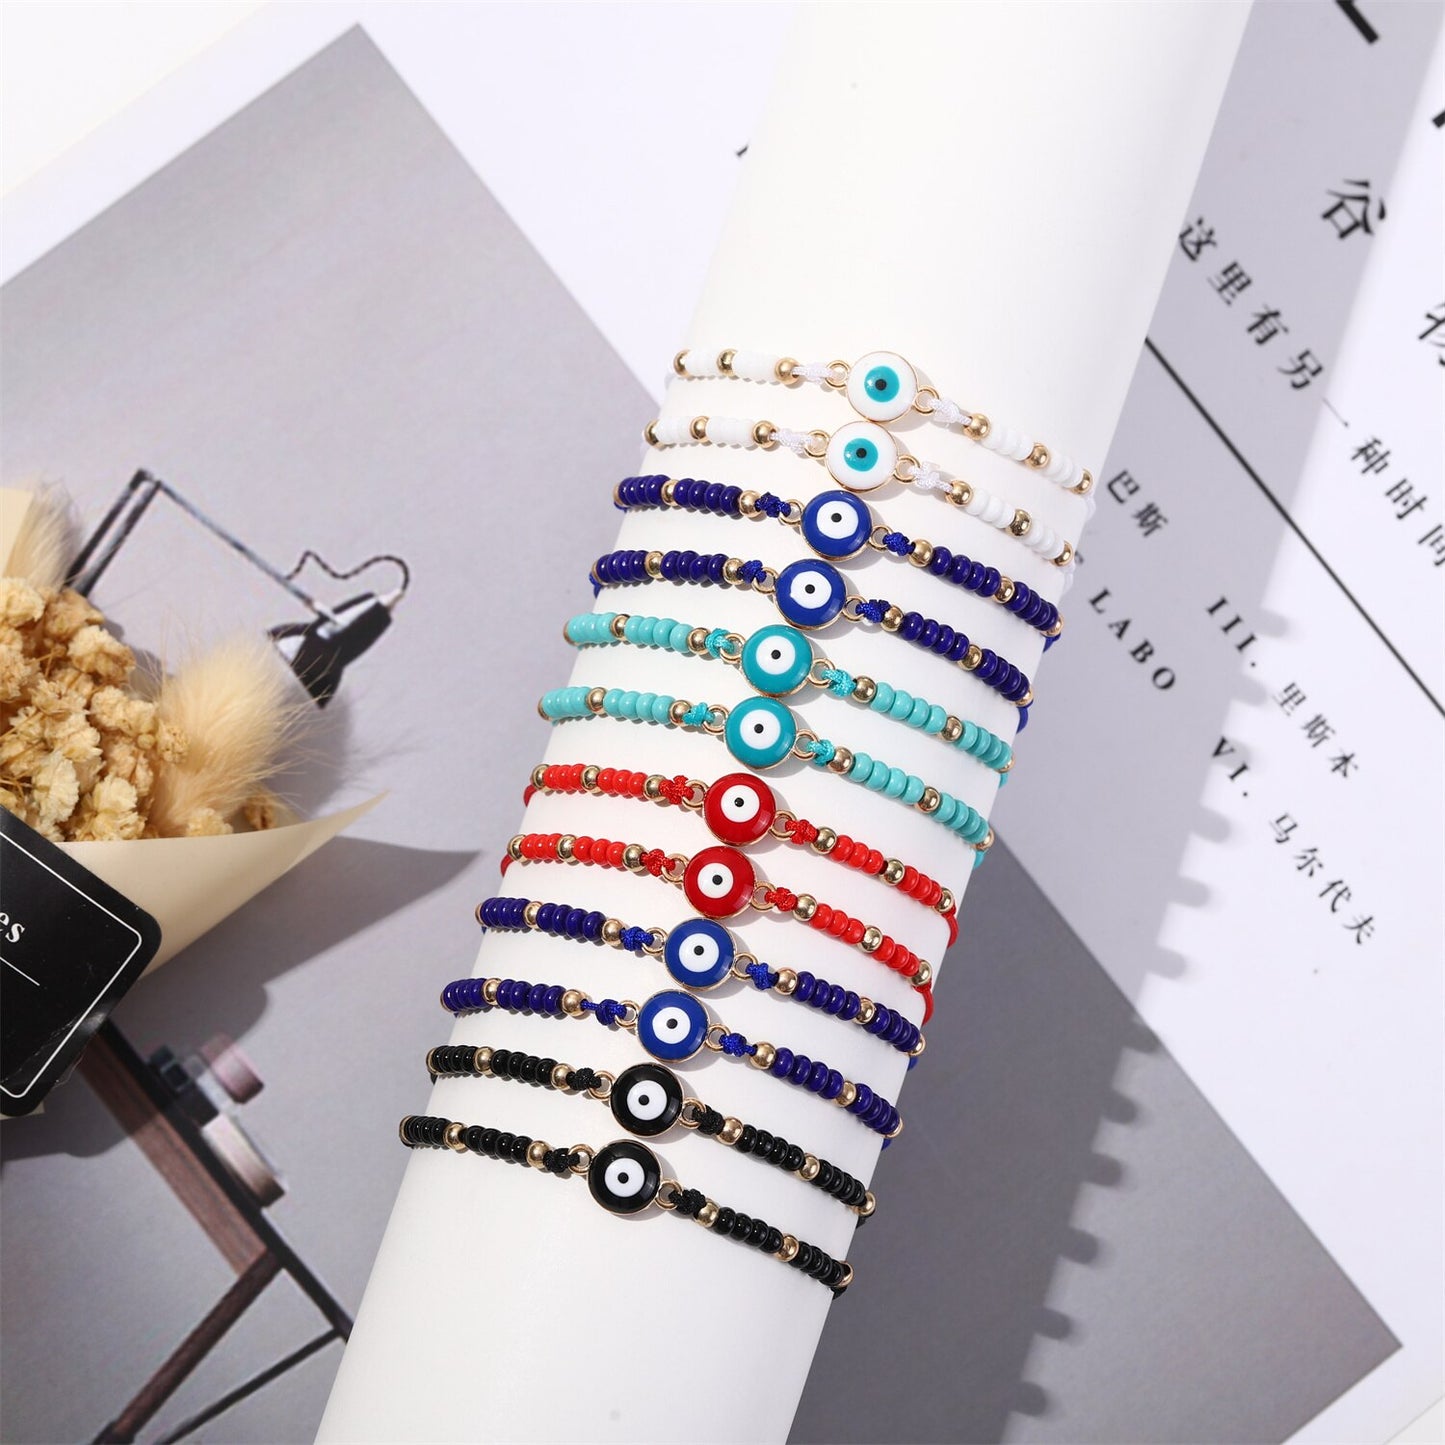 12pcs/lot Metal Dripping Oil Evil Eye Beads Charms Bracelet for Women Adjustable Woven Crystal Chain Summer Anklet Jewelry